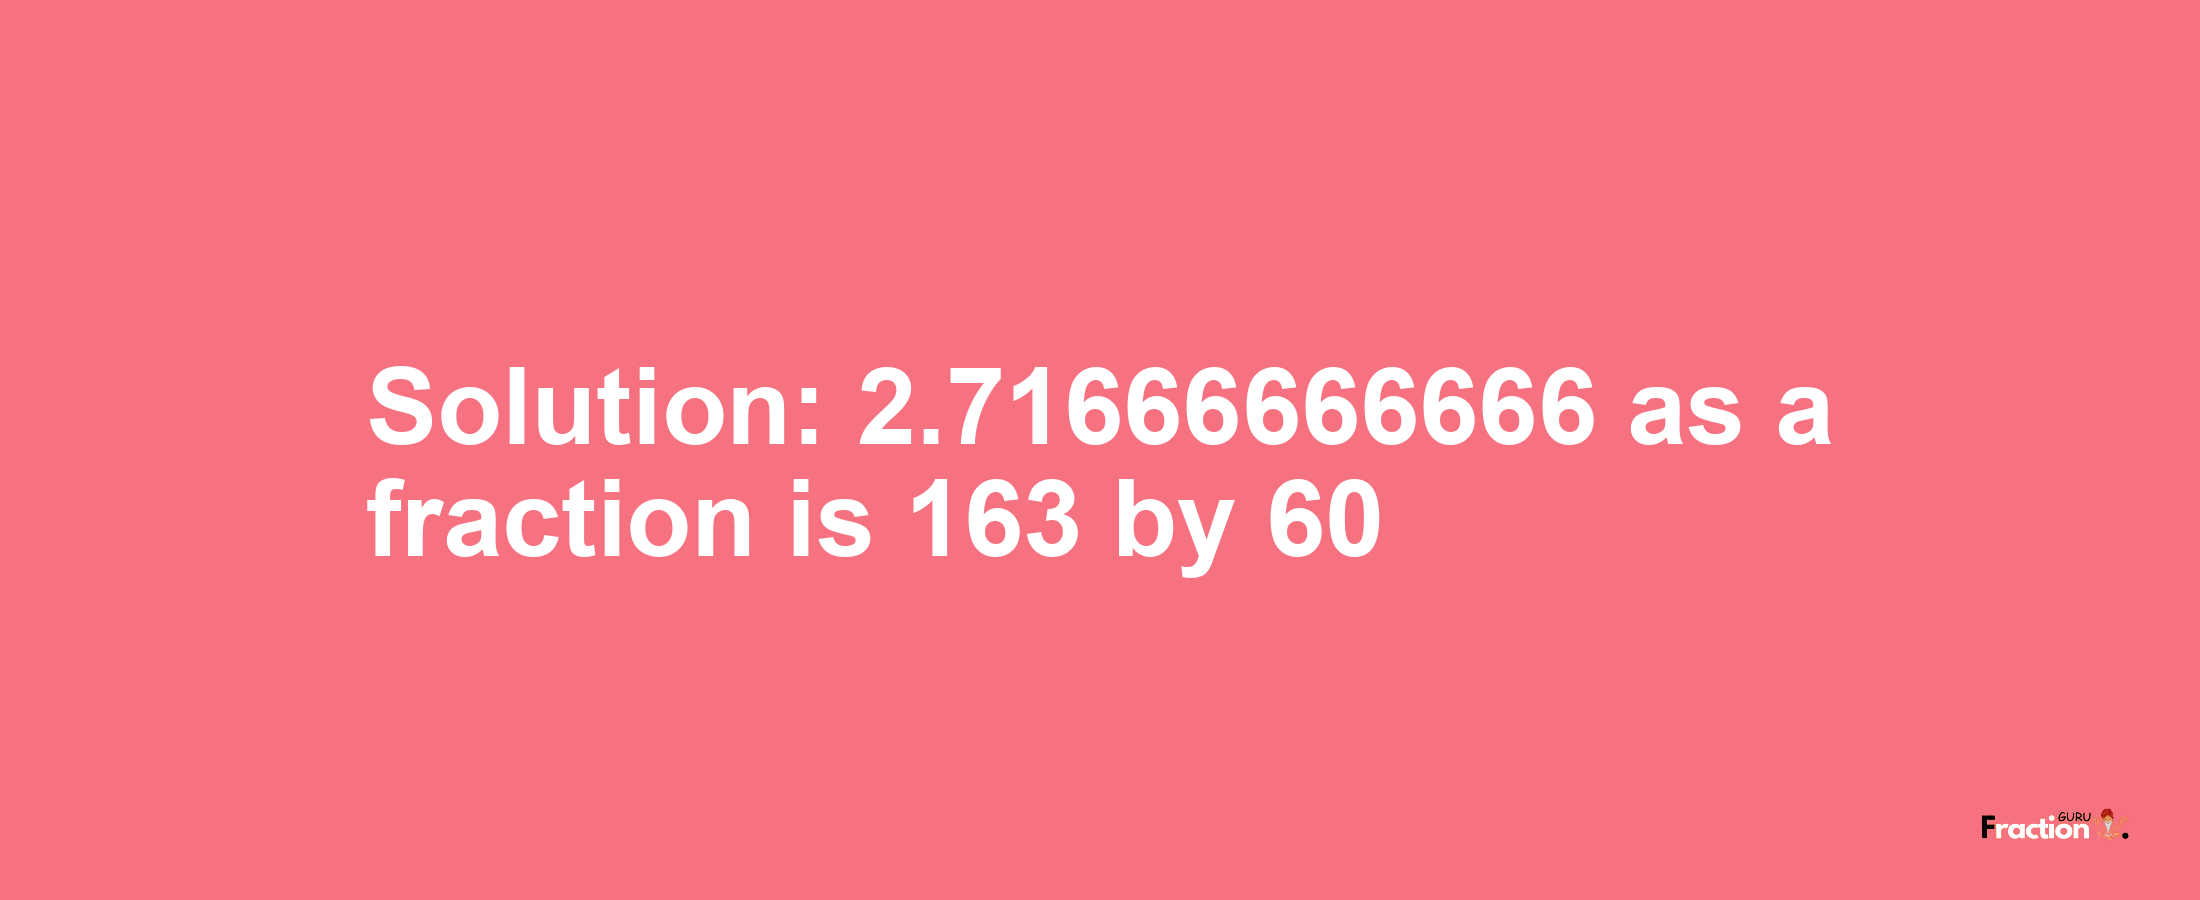 Solution:2.71666666666 as a fraction is 163/60